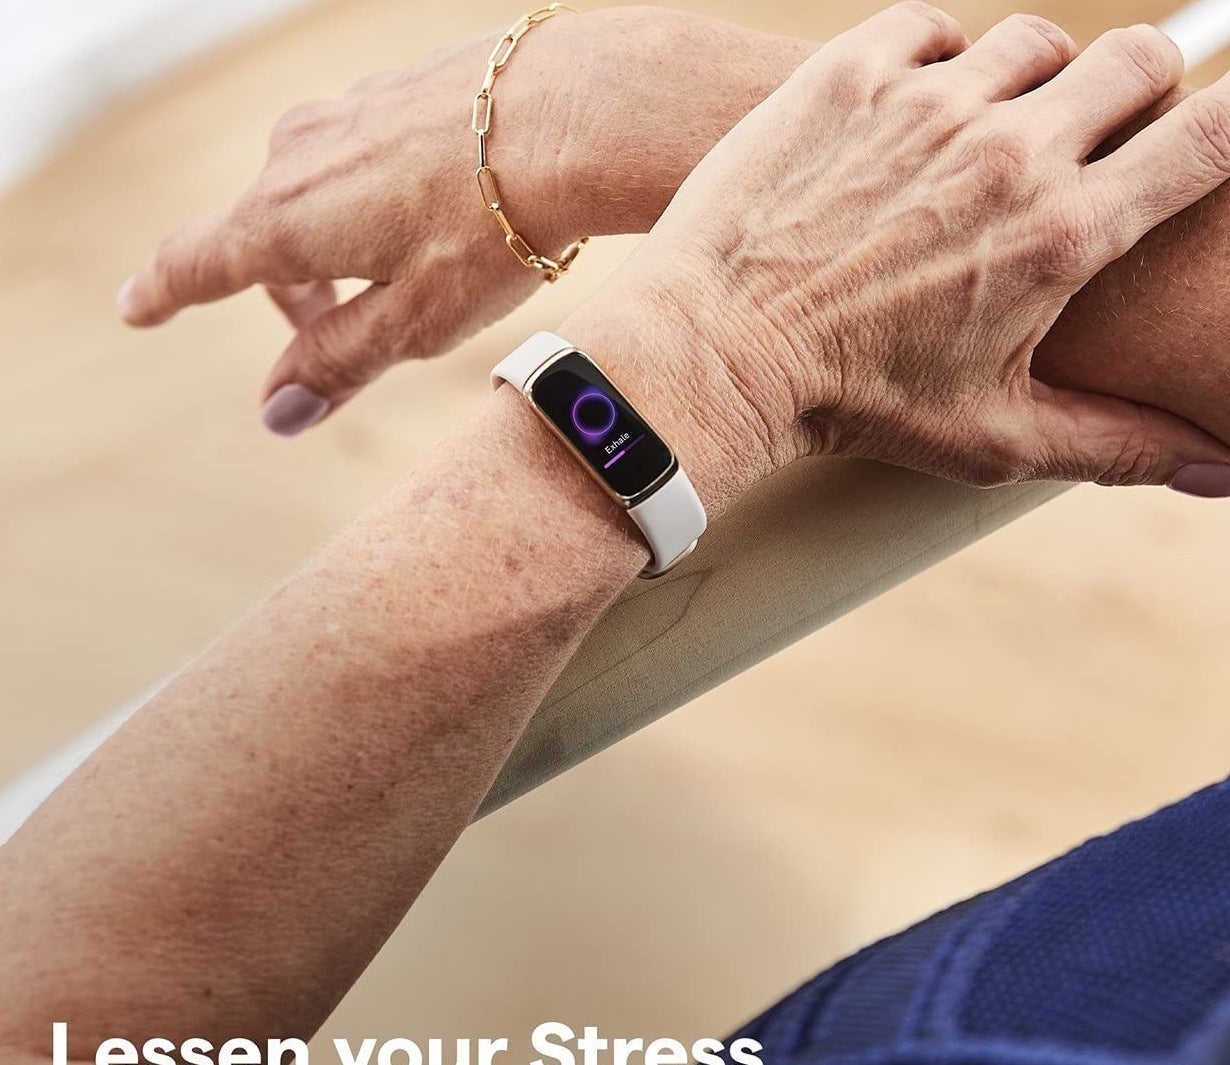 A person wearing the fitness tracker on their left arm